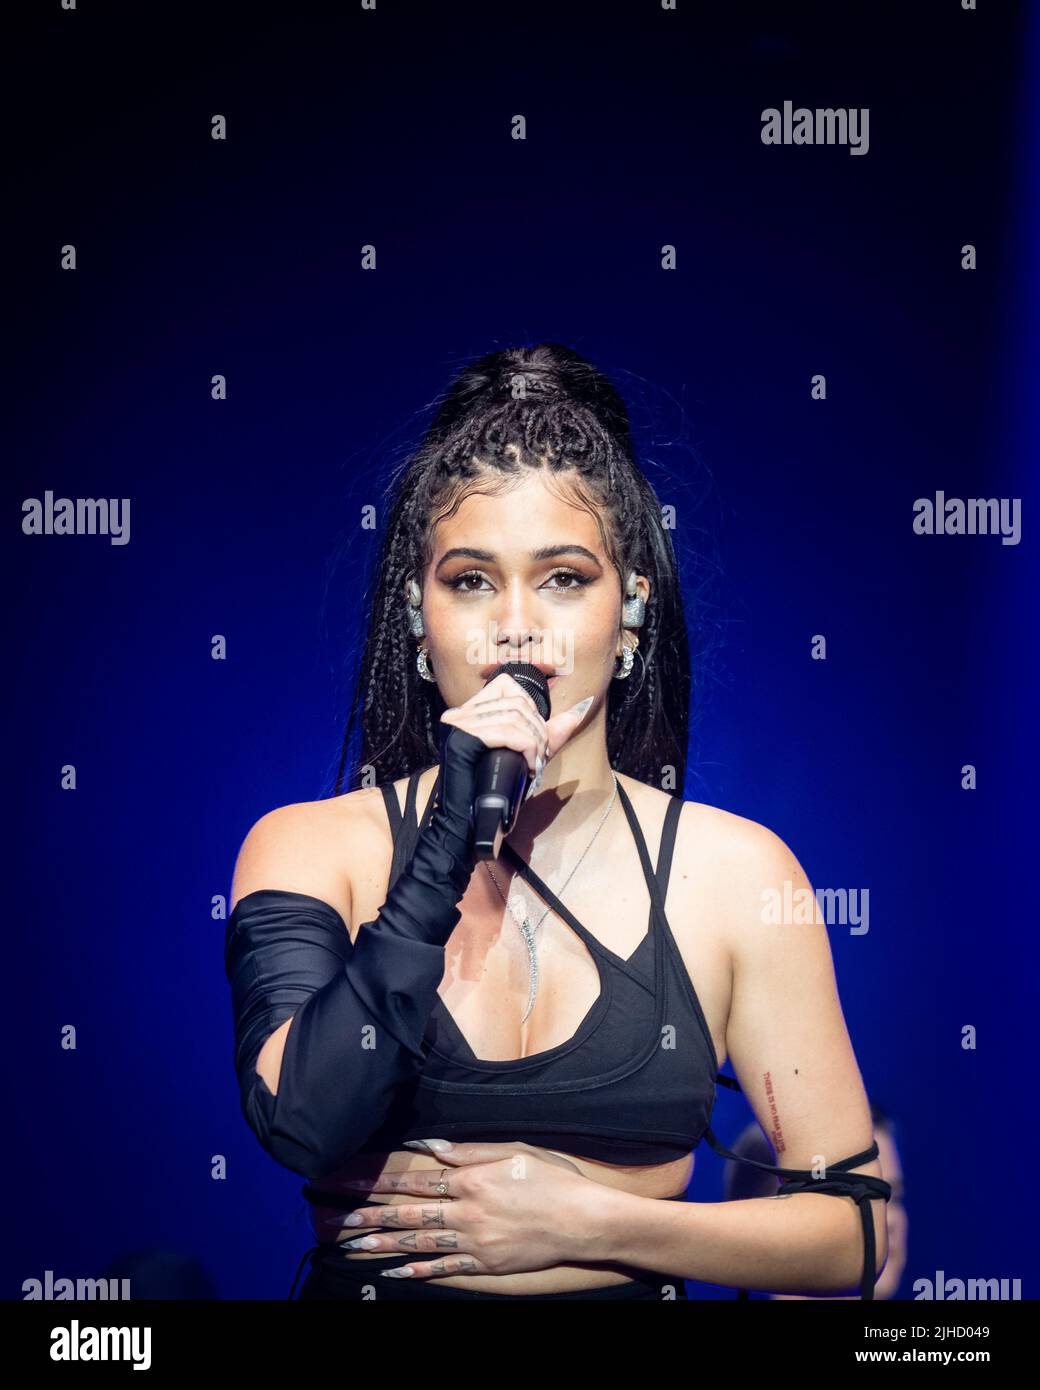 London, UK, Sunday, 17th July 2022 Mabel performs live on stage as part of the Somerset House Summer Series 2022, Somerset House, The Strand. Credit: DavidJensen / Empics Entertainment / Alamy Live News Stock Photo